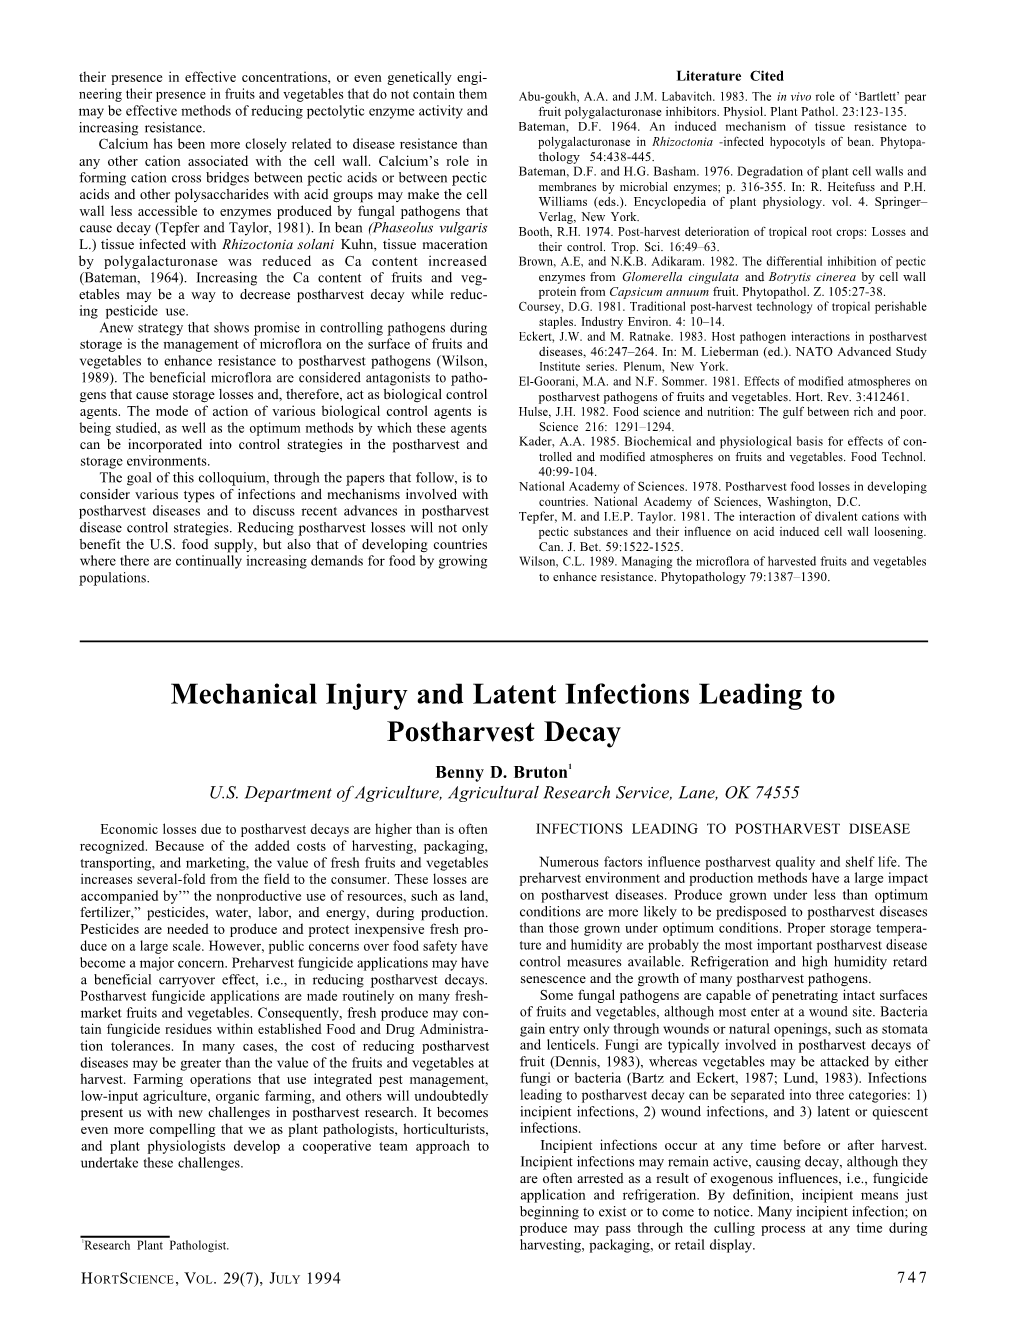 Mechanical Injury an Latent Infections Leading to Postharvest Decay